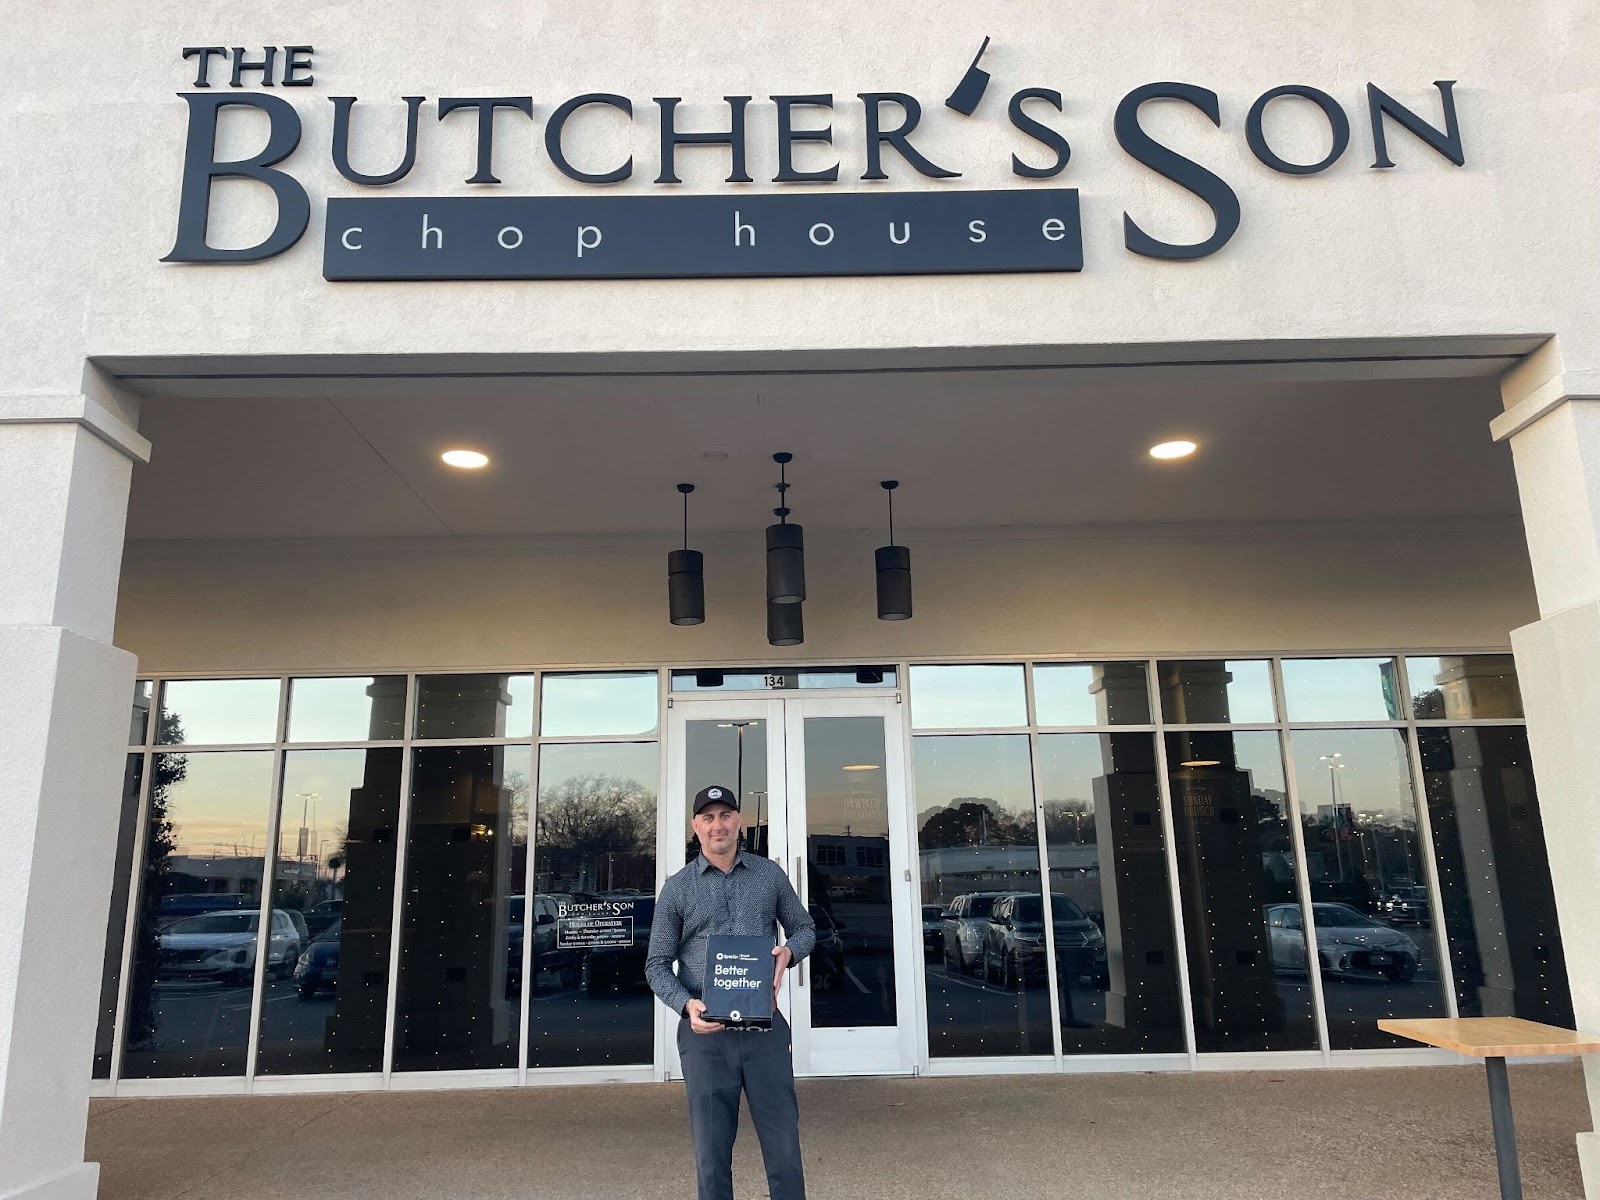 The Butcher's Son restaurant pos point of sale system restaurant operation owner posing with the restaurant